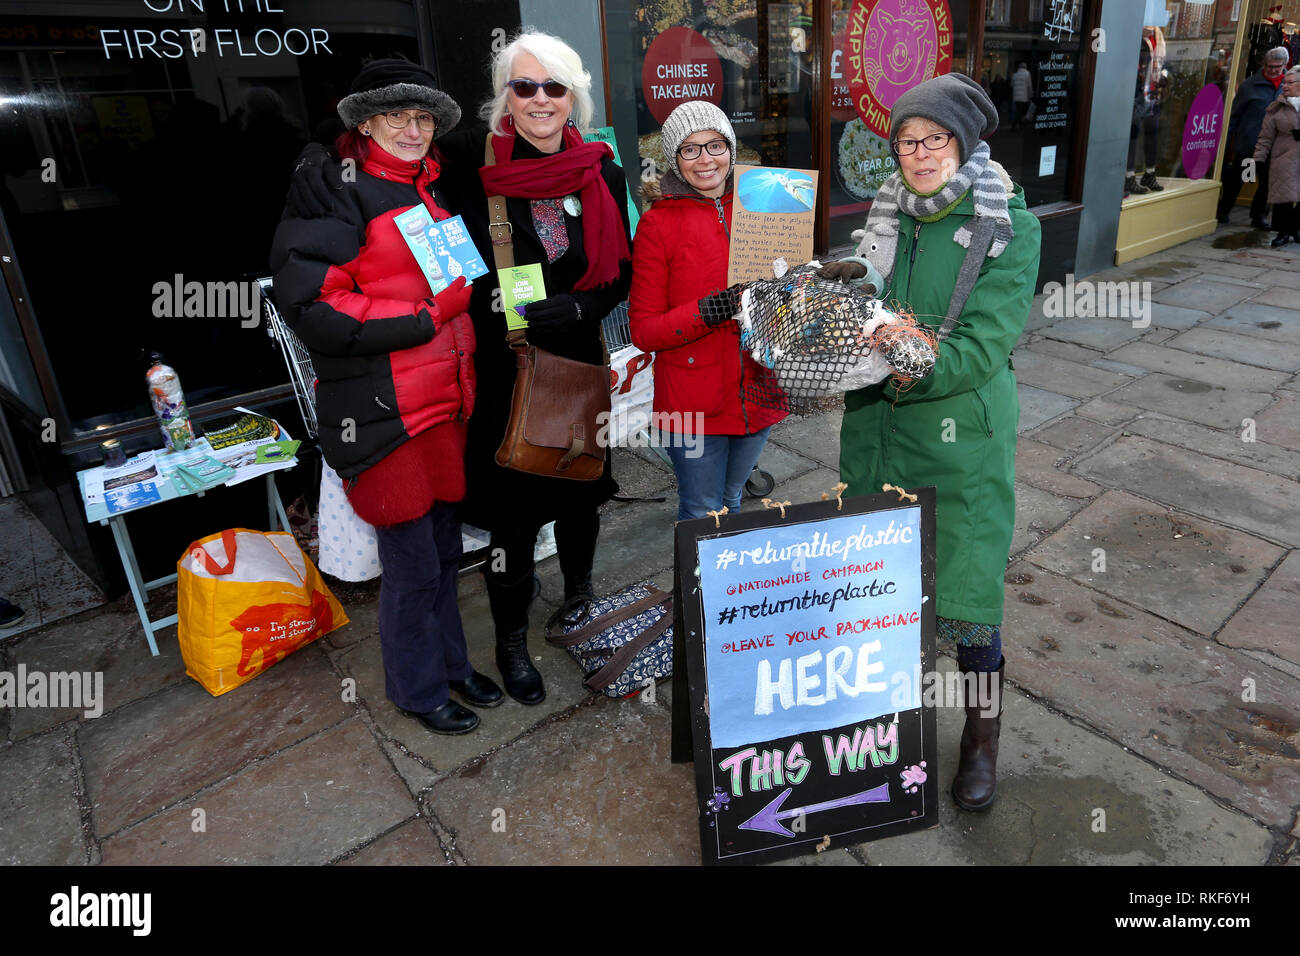 Climate change campaigners pictured protesting outside the Marks and Spencer store in Chichester, West Sussex, UK, over plastic and waste packaging. Stock Photo